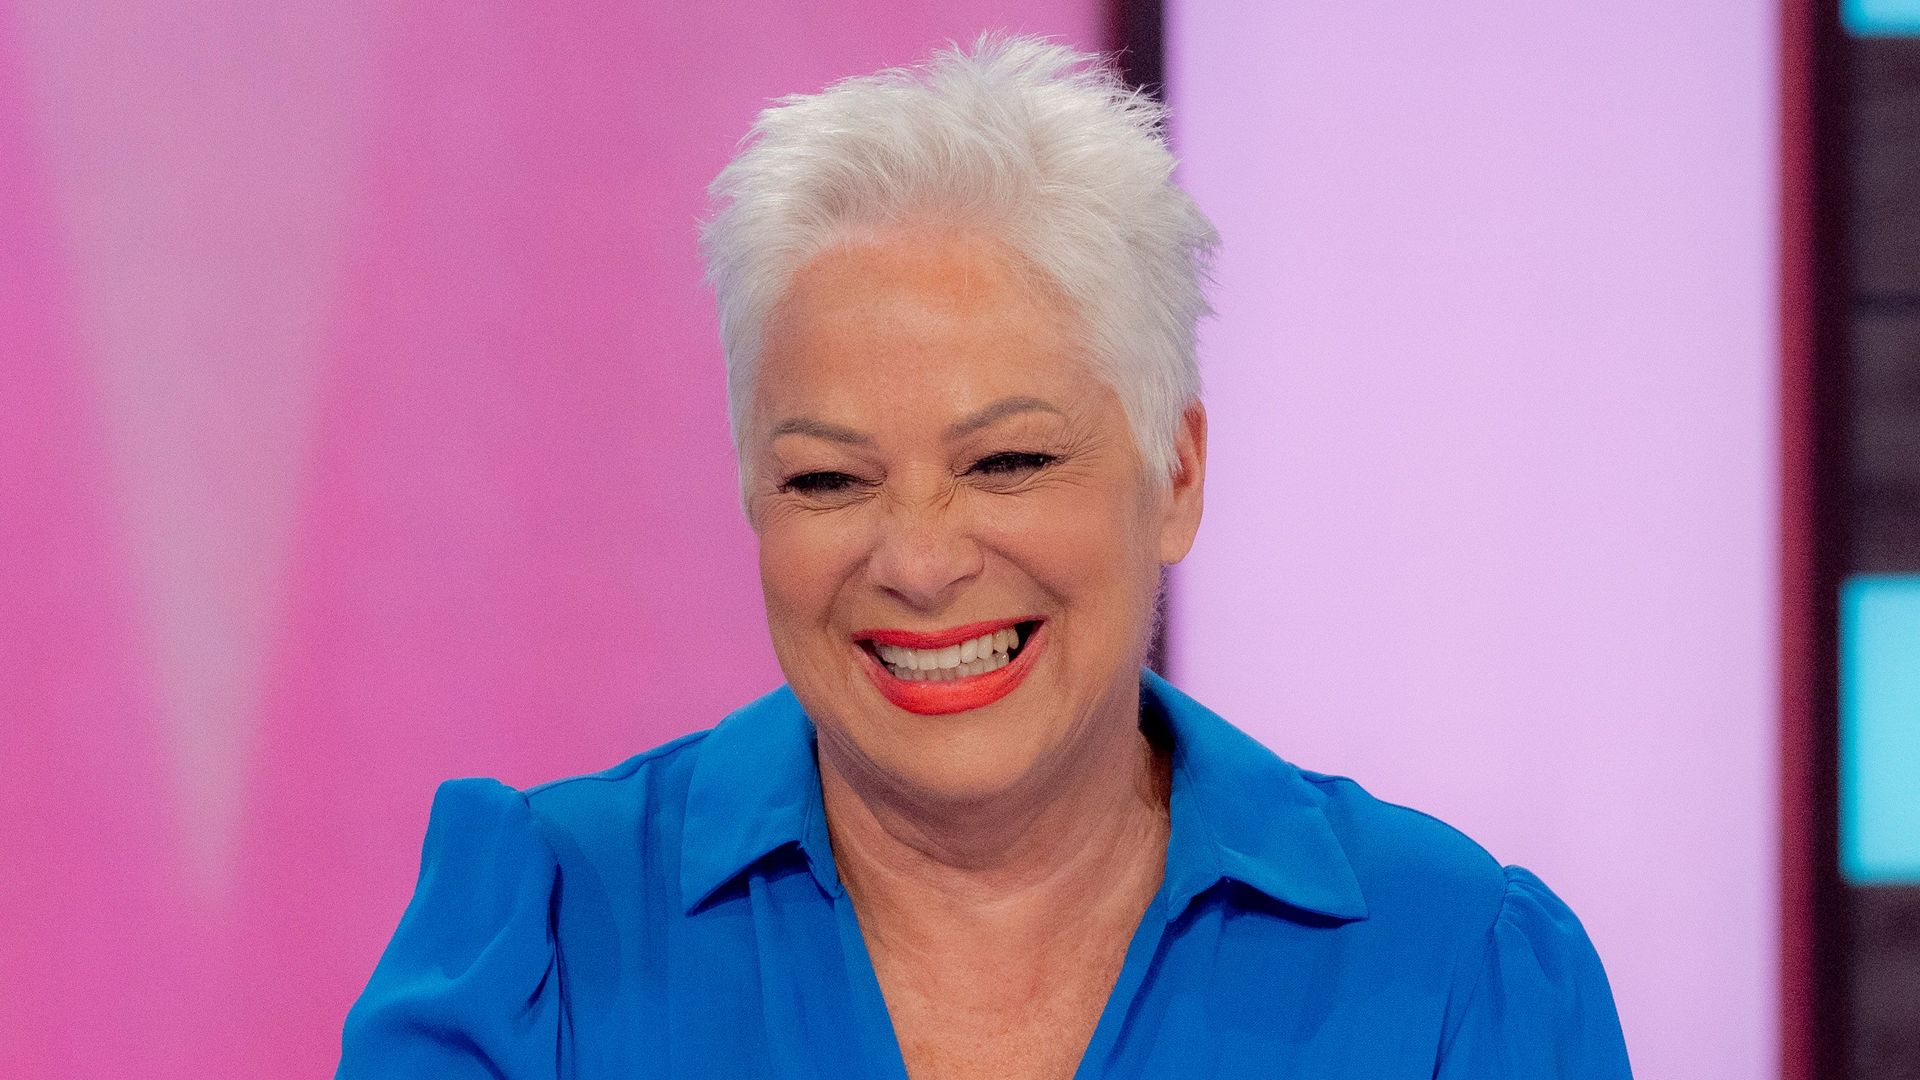 Denise Welch, 65, sizzles in risque corset and see-through tights